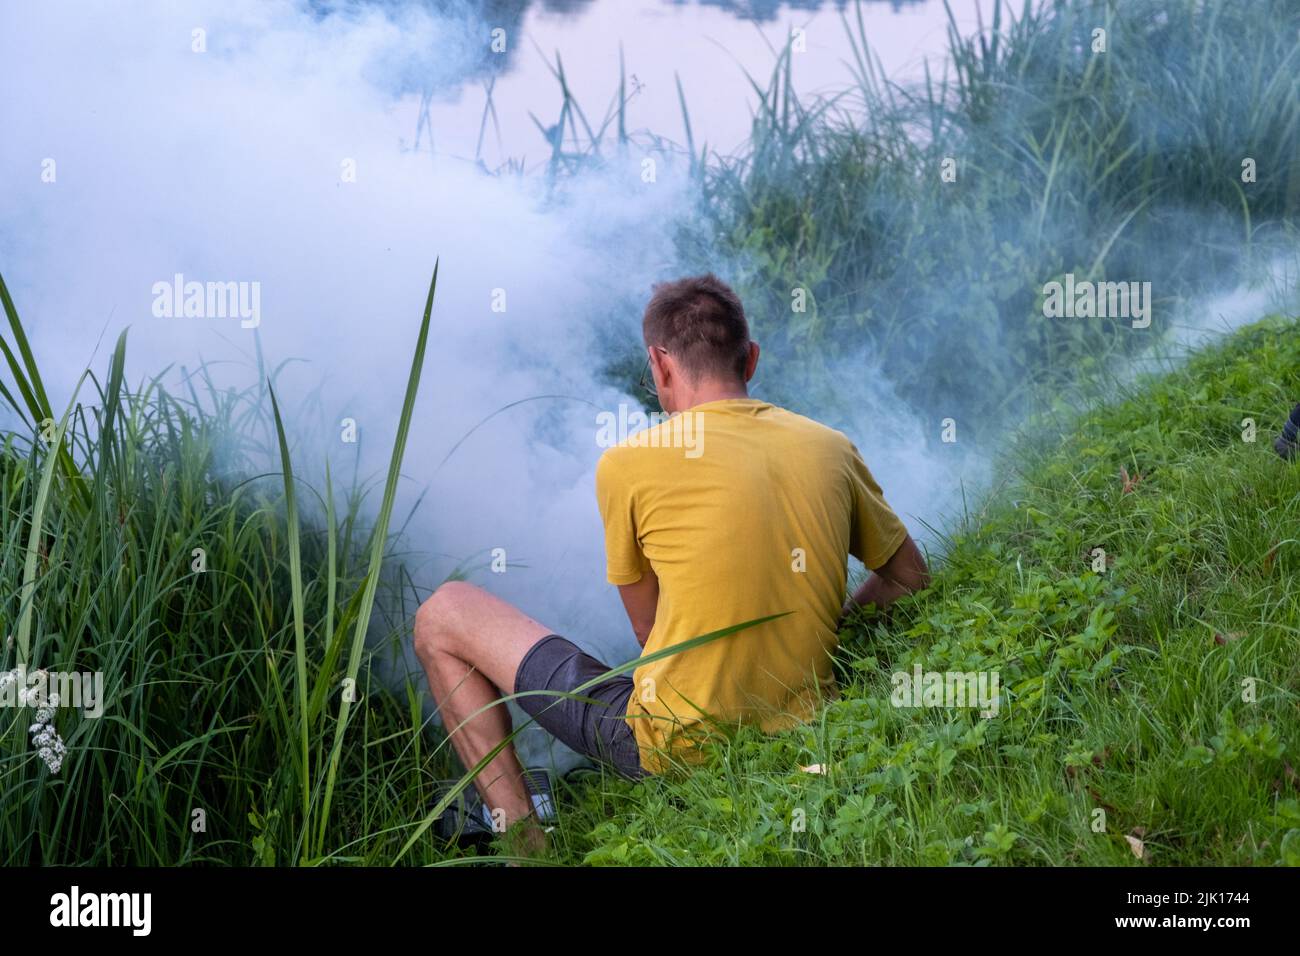 A man in a yellow shirt sets up a smoke machine for an event in nature. Stock Photo